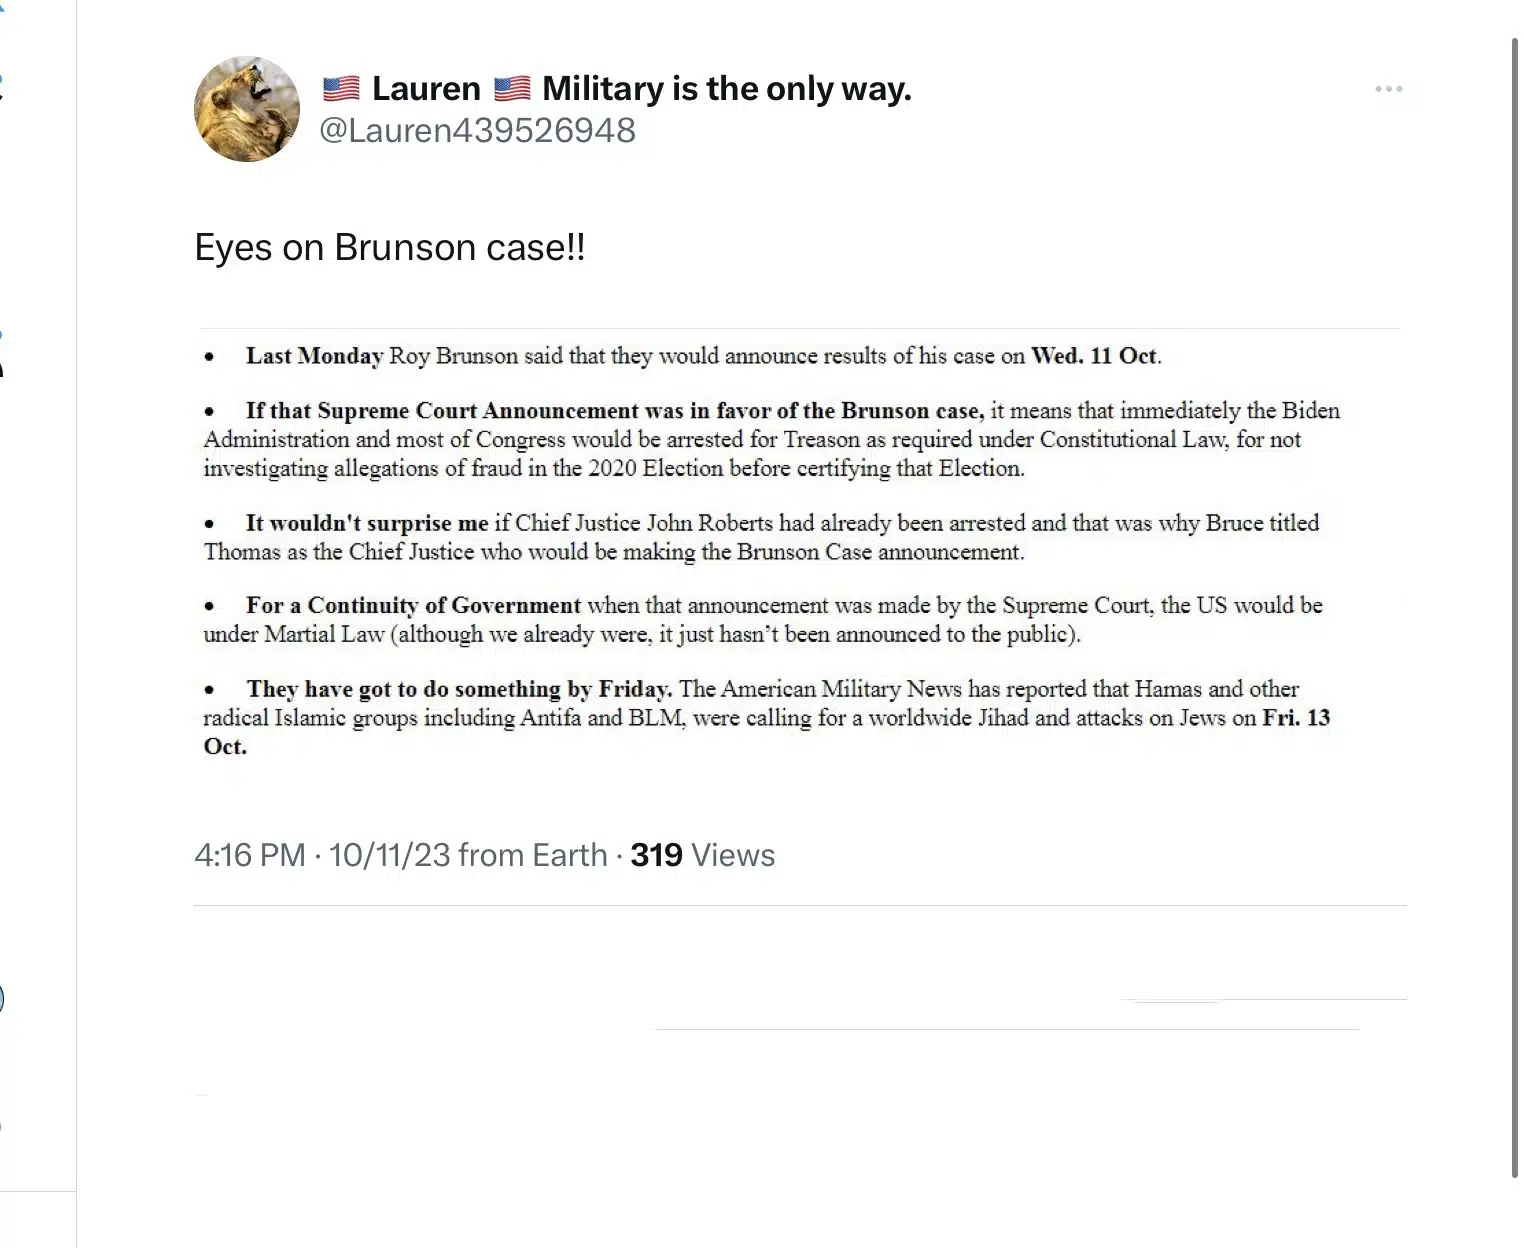 Brunson and a call for a coup